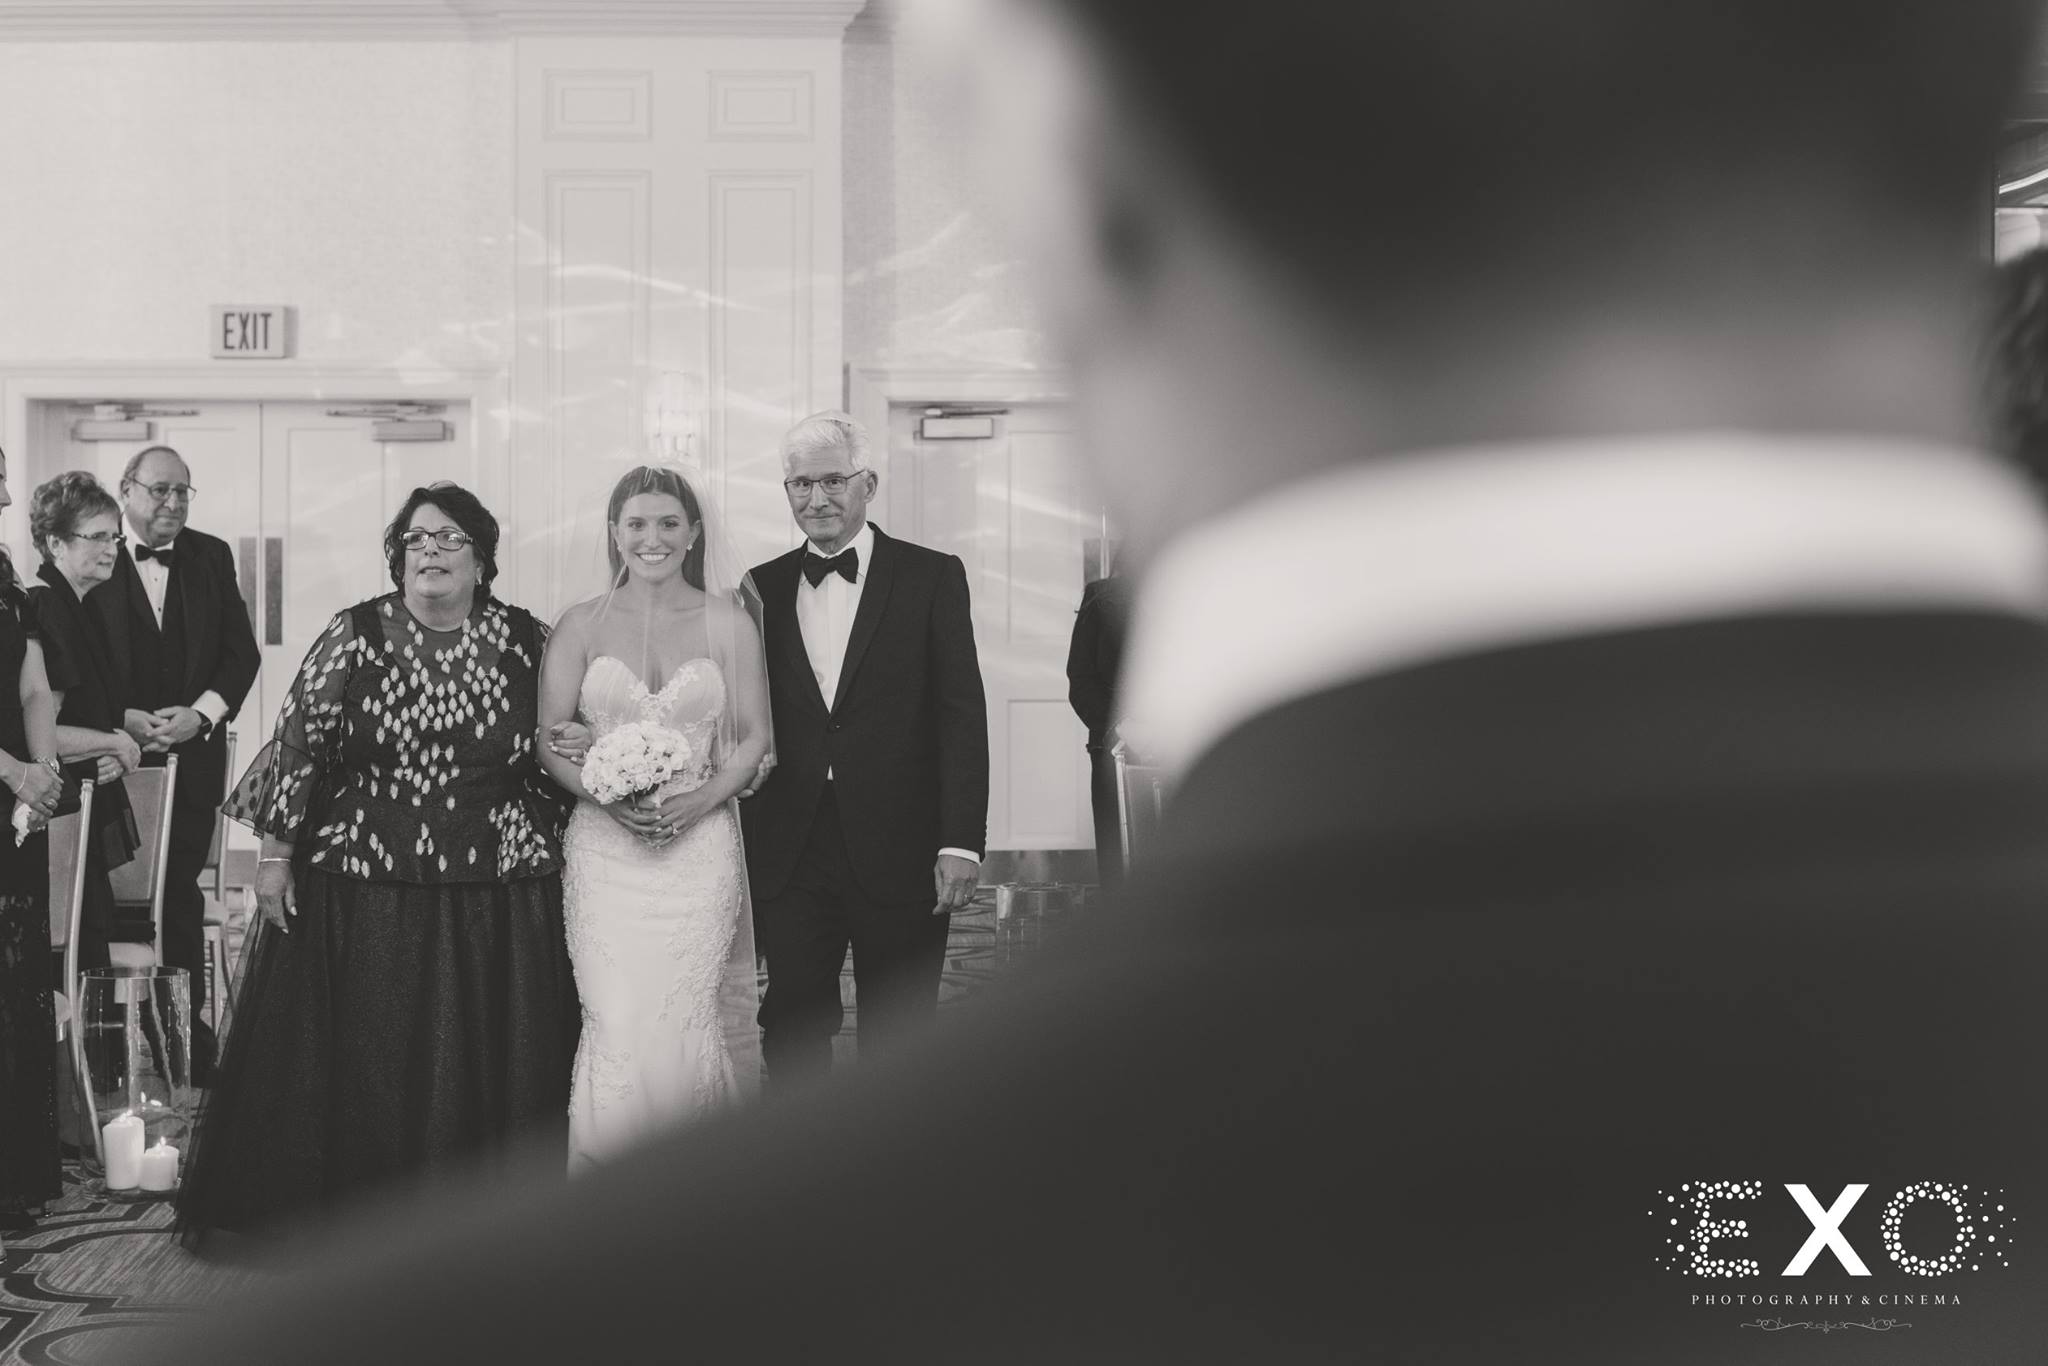 black and white image from grooms perspective of bride coming down aisle